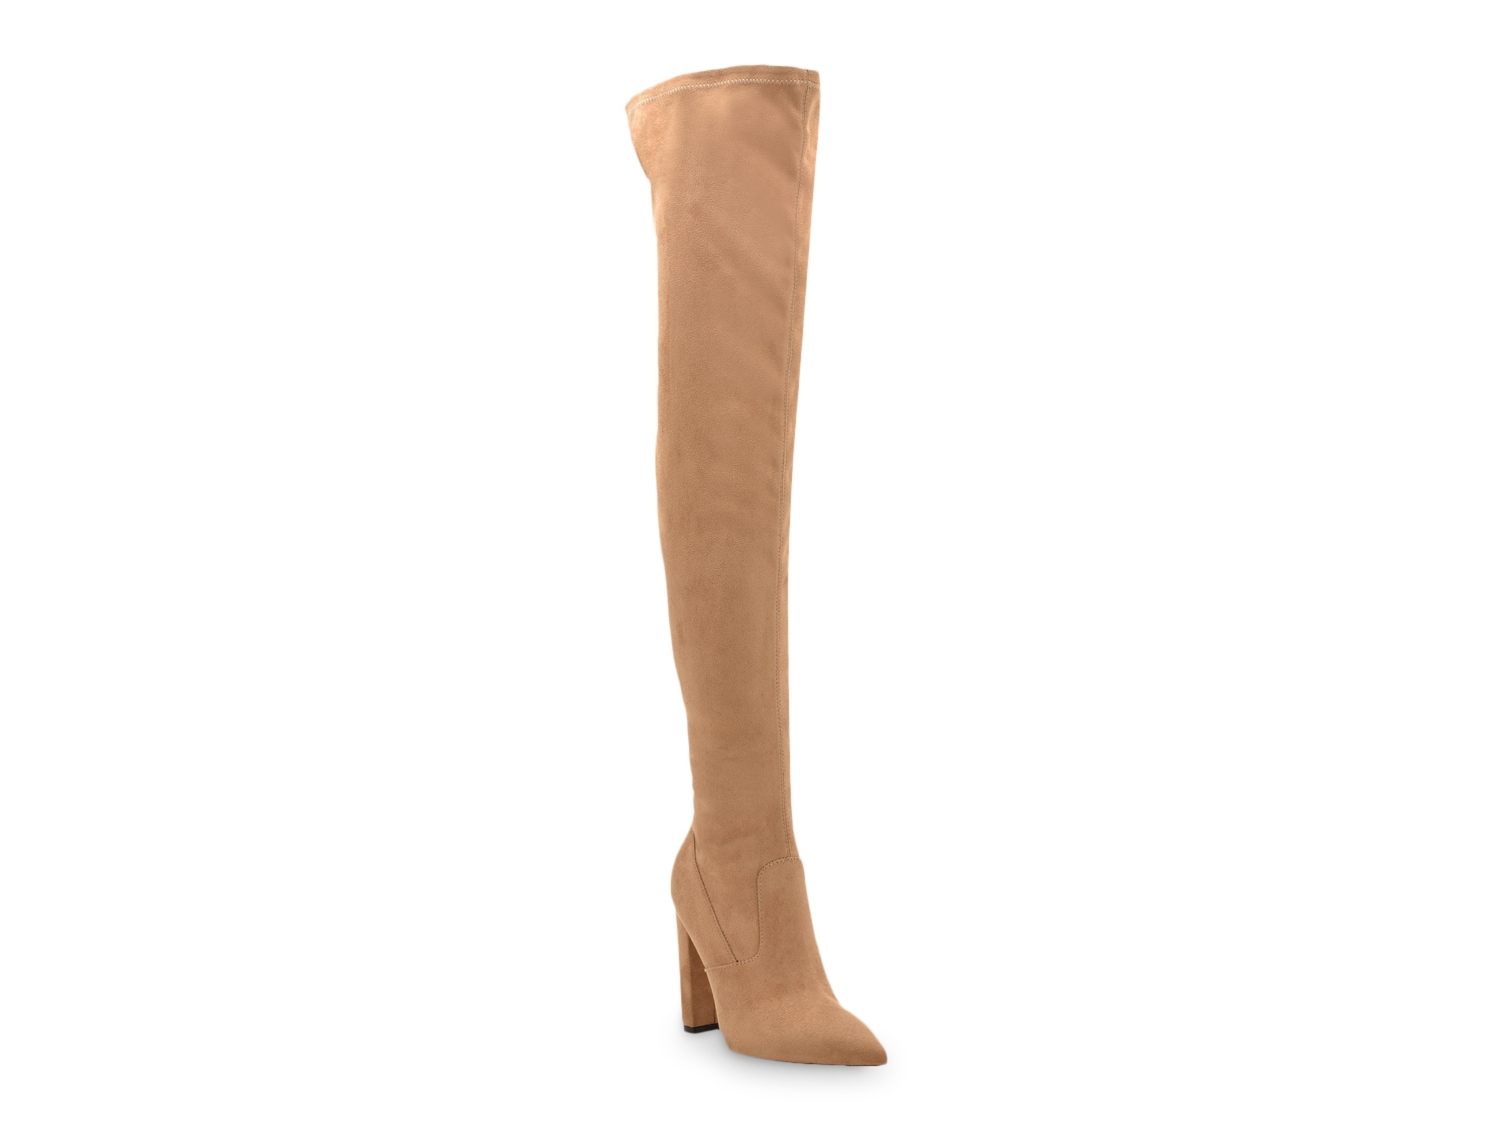 Guess Women's Ladiva Tall Over-The-Knee Boots